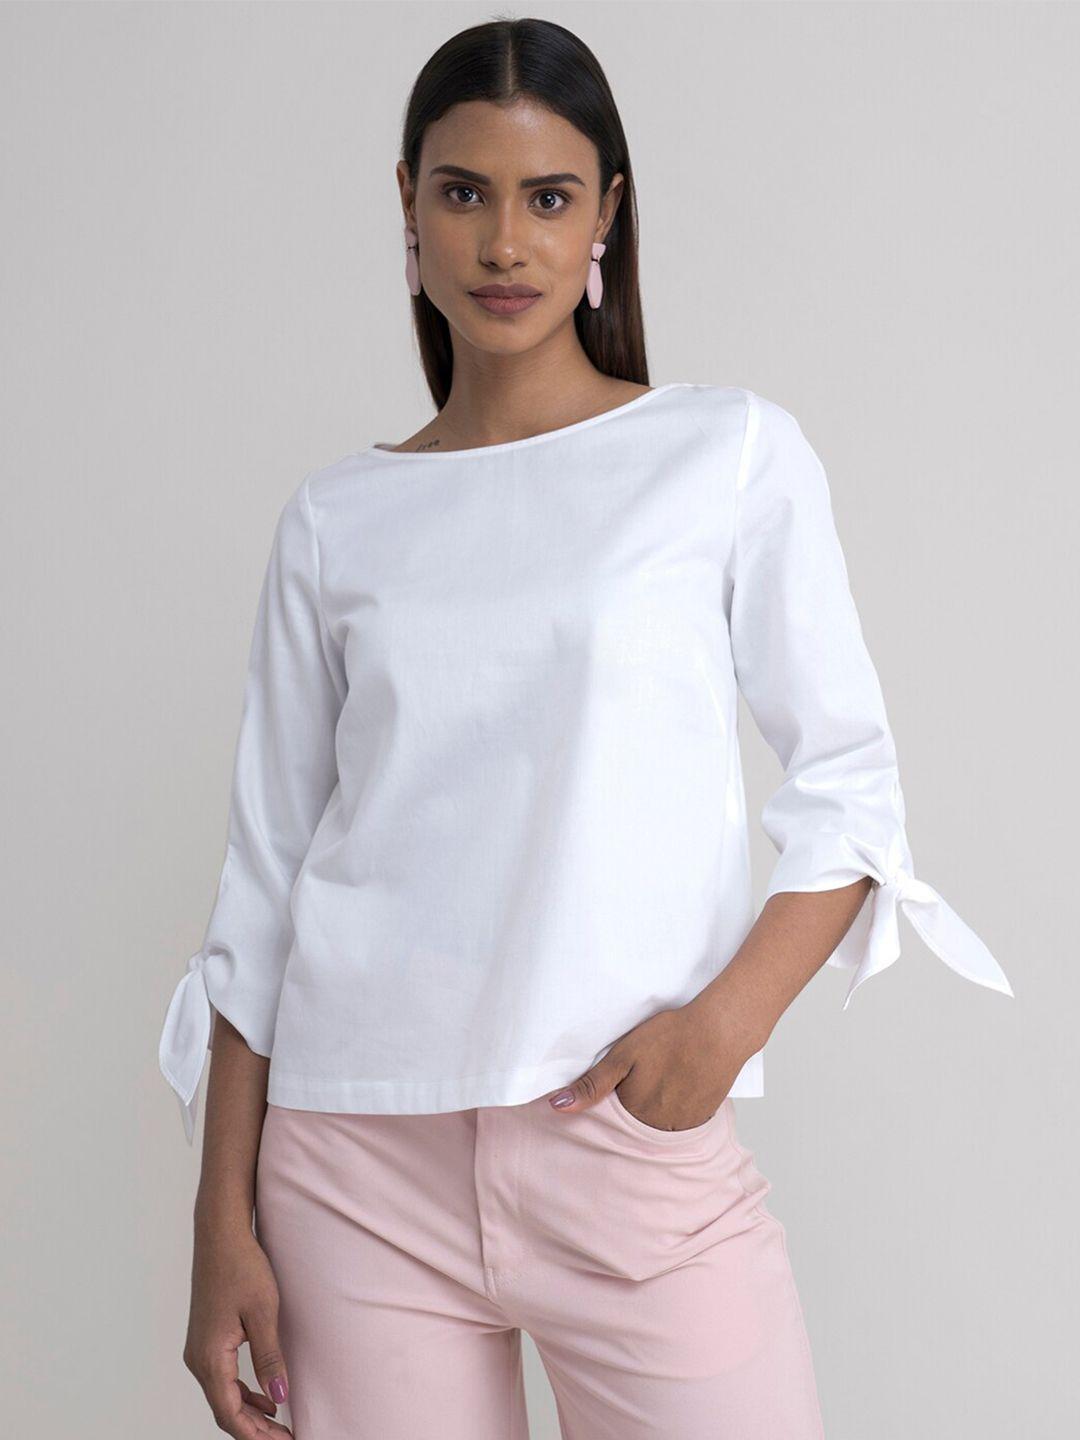 fablestreet white solid top